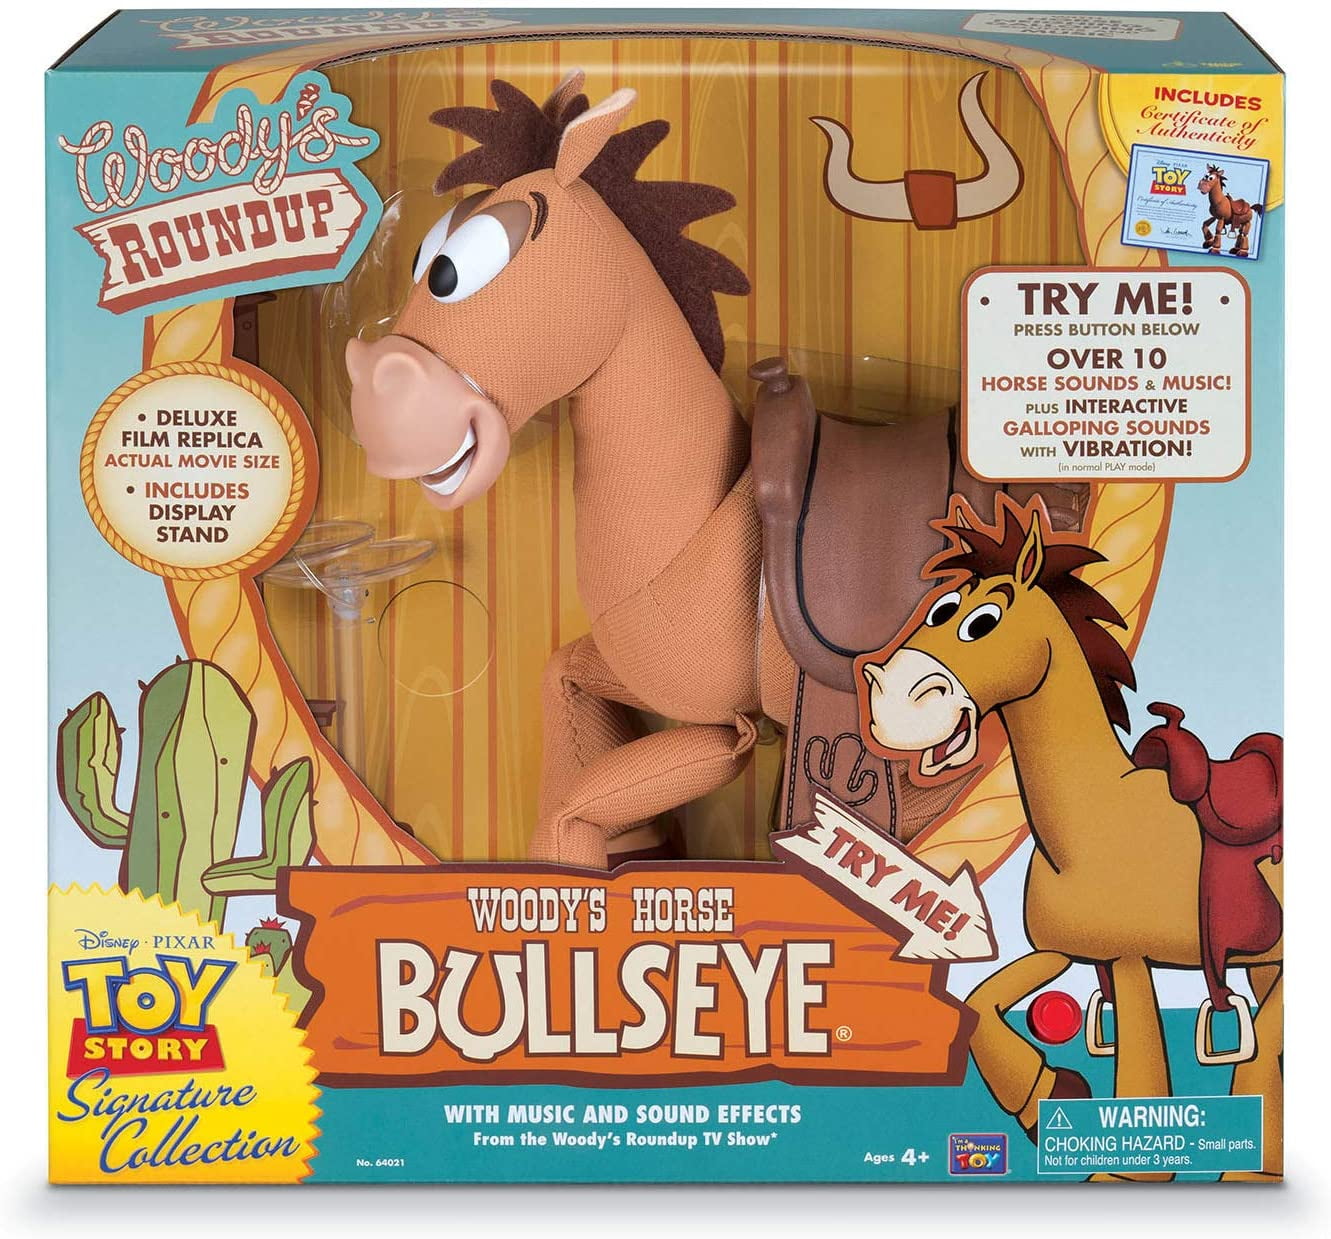 Disney Toy Story 4 Bullseye the Horse TV Movie Offical Licenced New Boxed